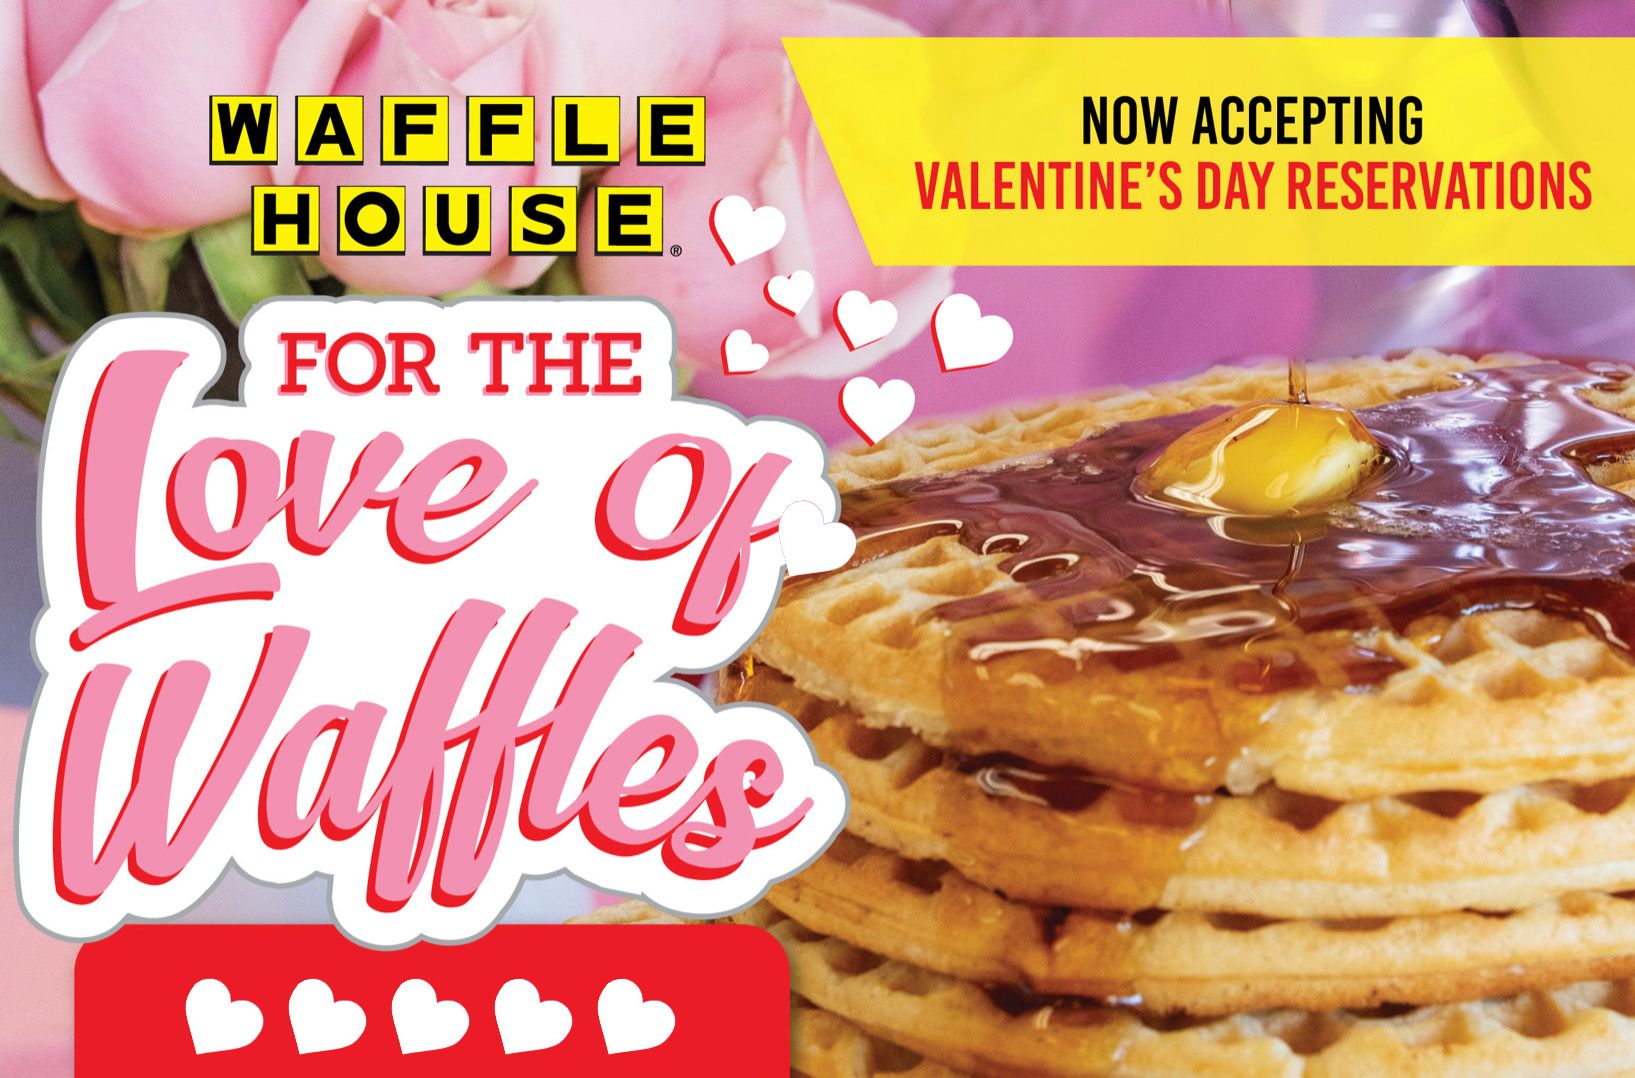 Participating Waffle House Restaurants are Now Taking Valentine's Day Reservations